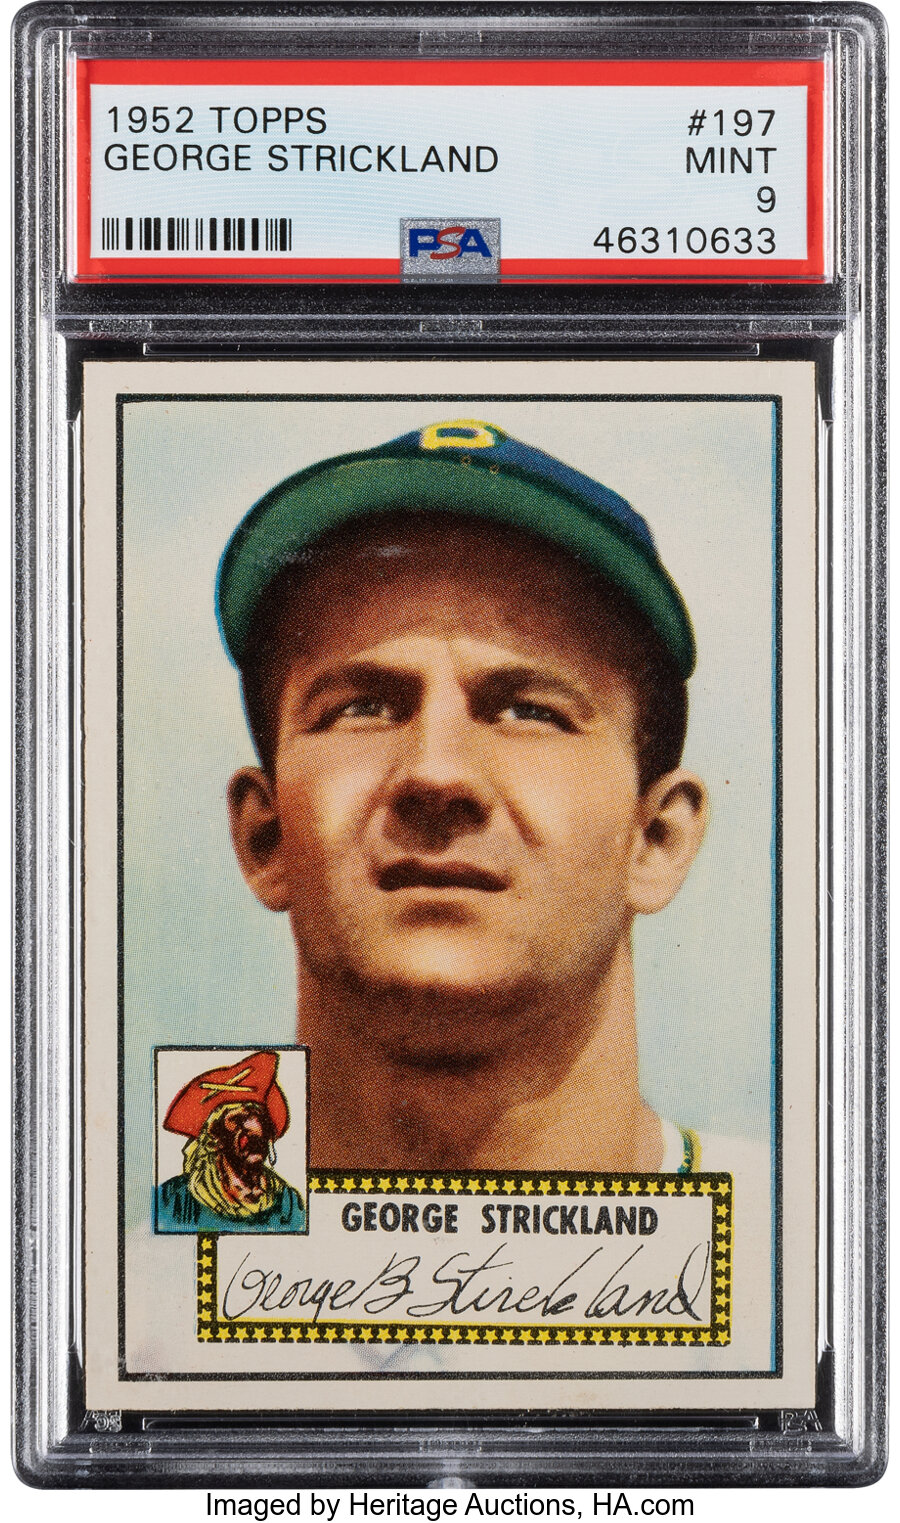 1952 Topps George Strickland #197 PSA Mint 9 - None Higher!